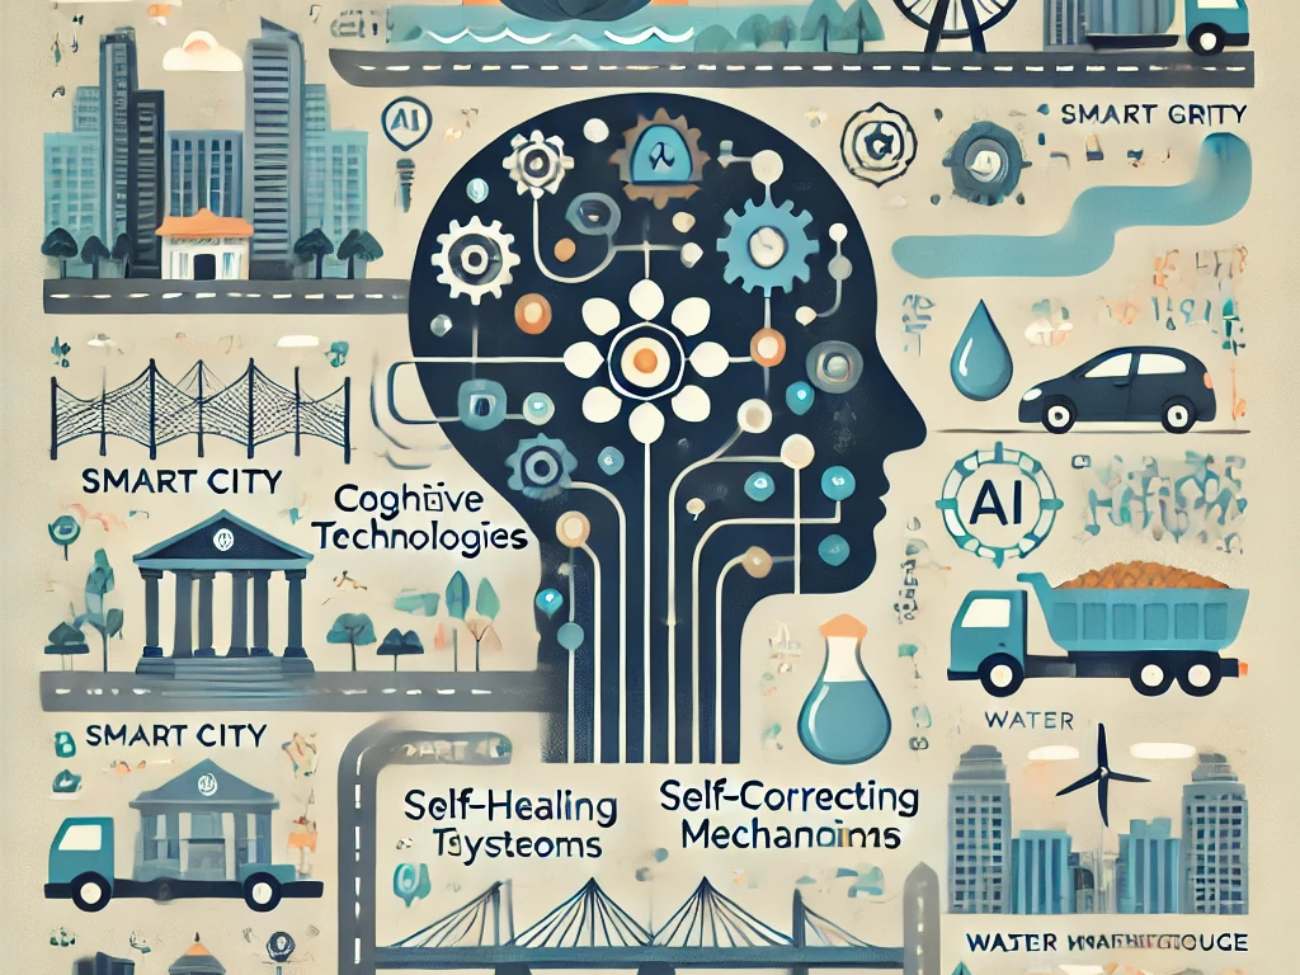 DALL·E 2024-06-21 09.32.28 - A subtle and modern illustration depicting the use of cognitive technologies and self-correcting mechanisms in smart city governance and maintenance.